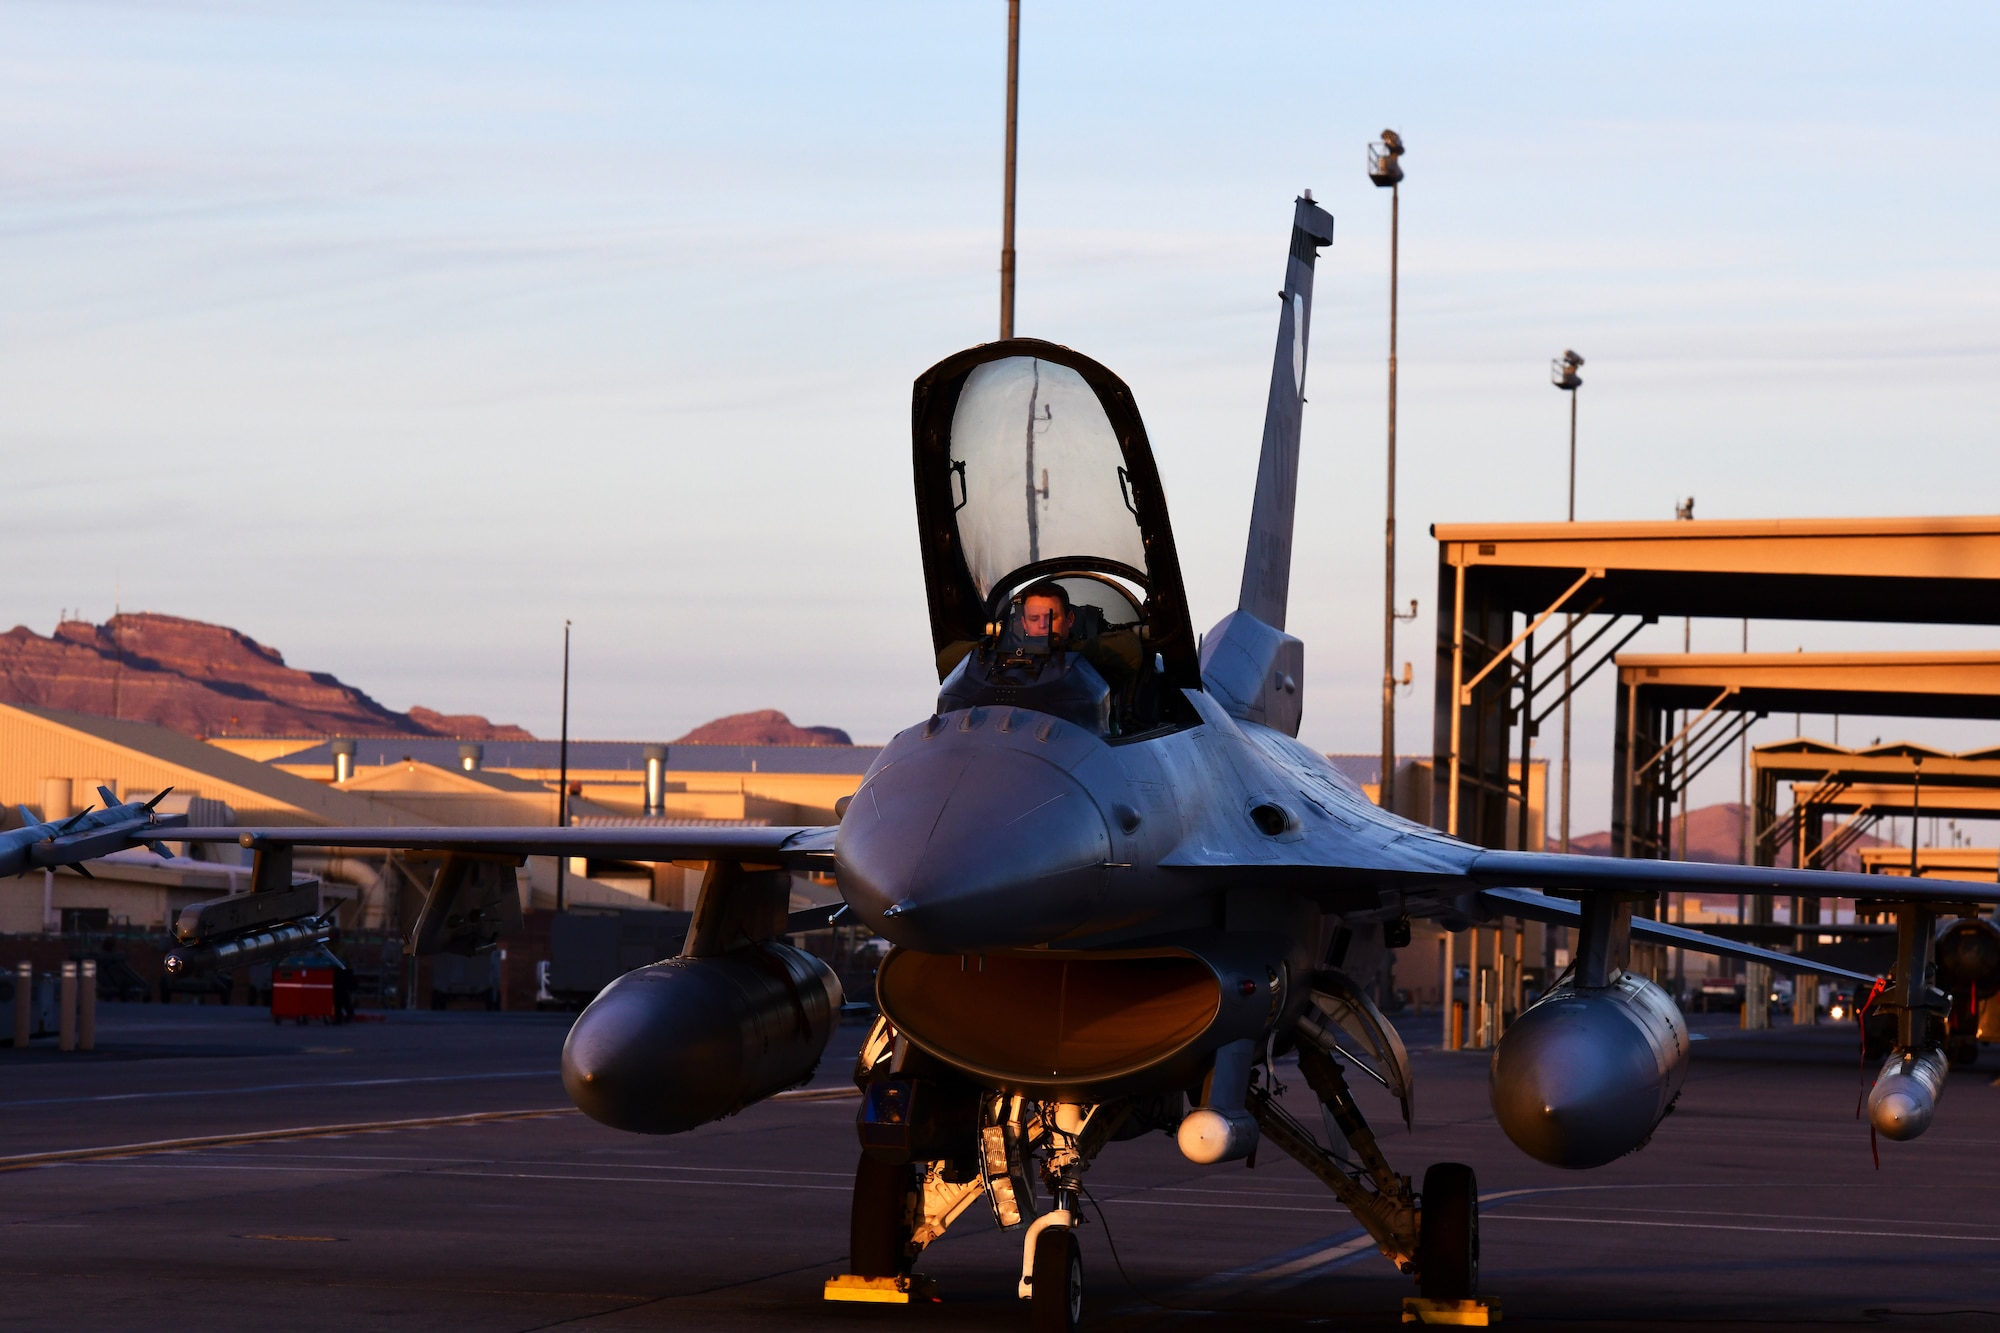 Lt. Col. Stephen Graham, 84th TES electronic warfare test director, prepares for flight to conduct Force Development Evaluations of multiple systems on the F-16, Dec. 15, Nellis Air Force Base, Nev. (U.S. Air Force Photo by Staff Sgt. Paige Yenke)